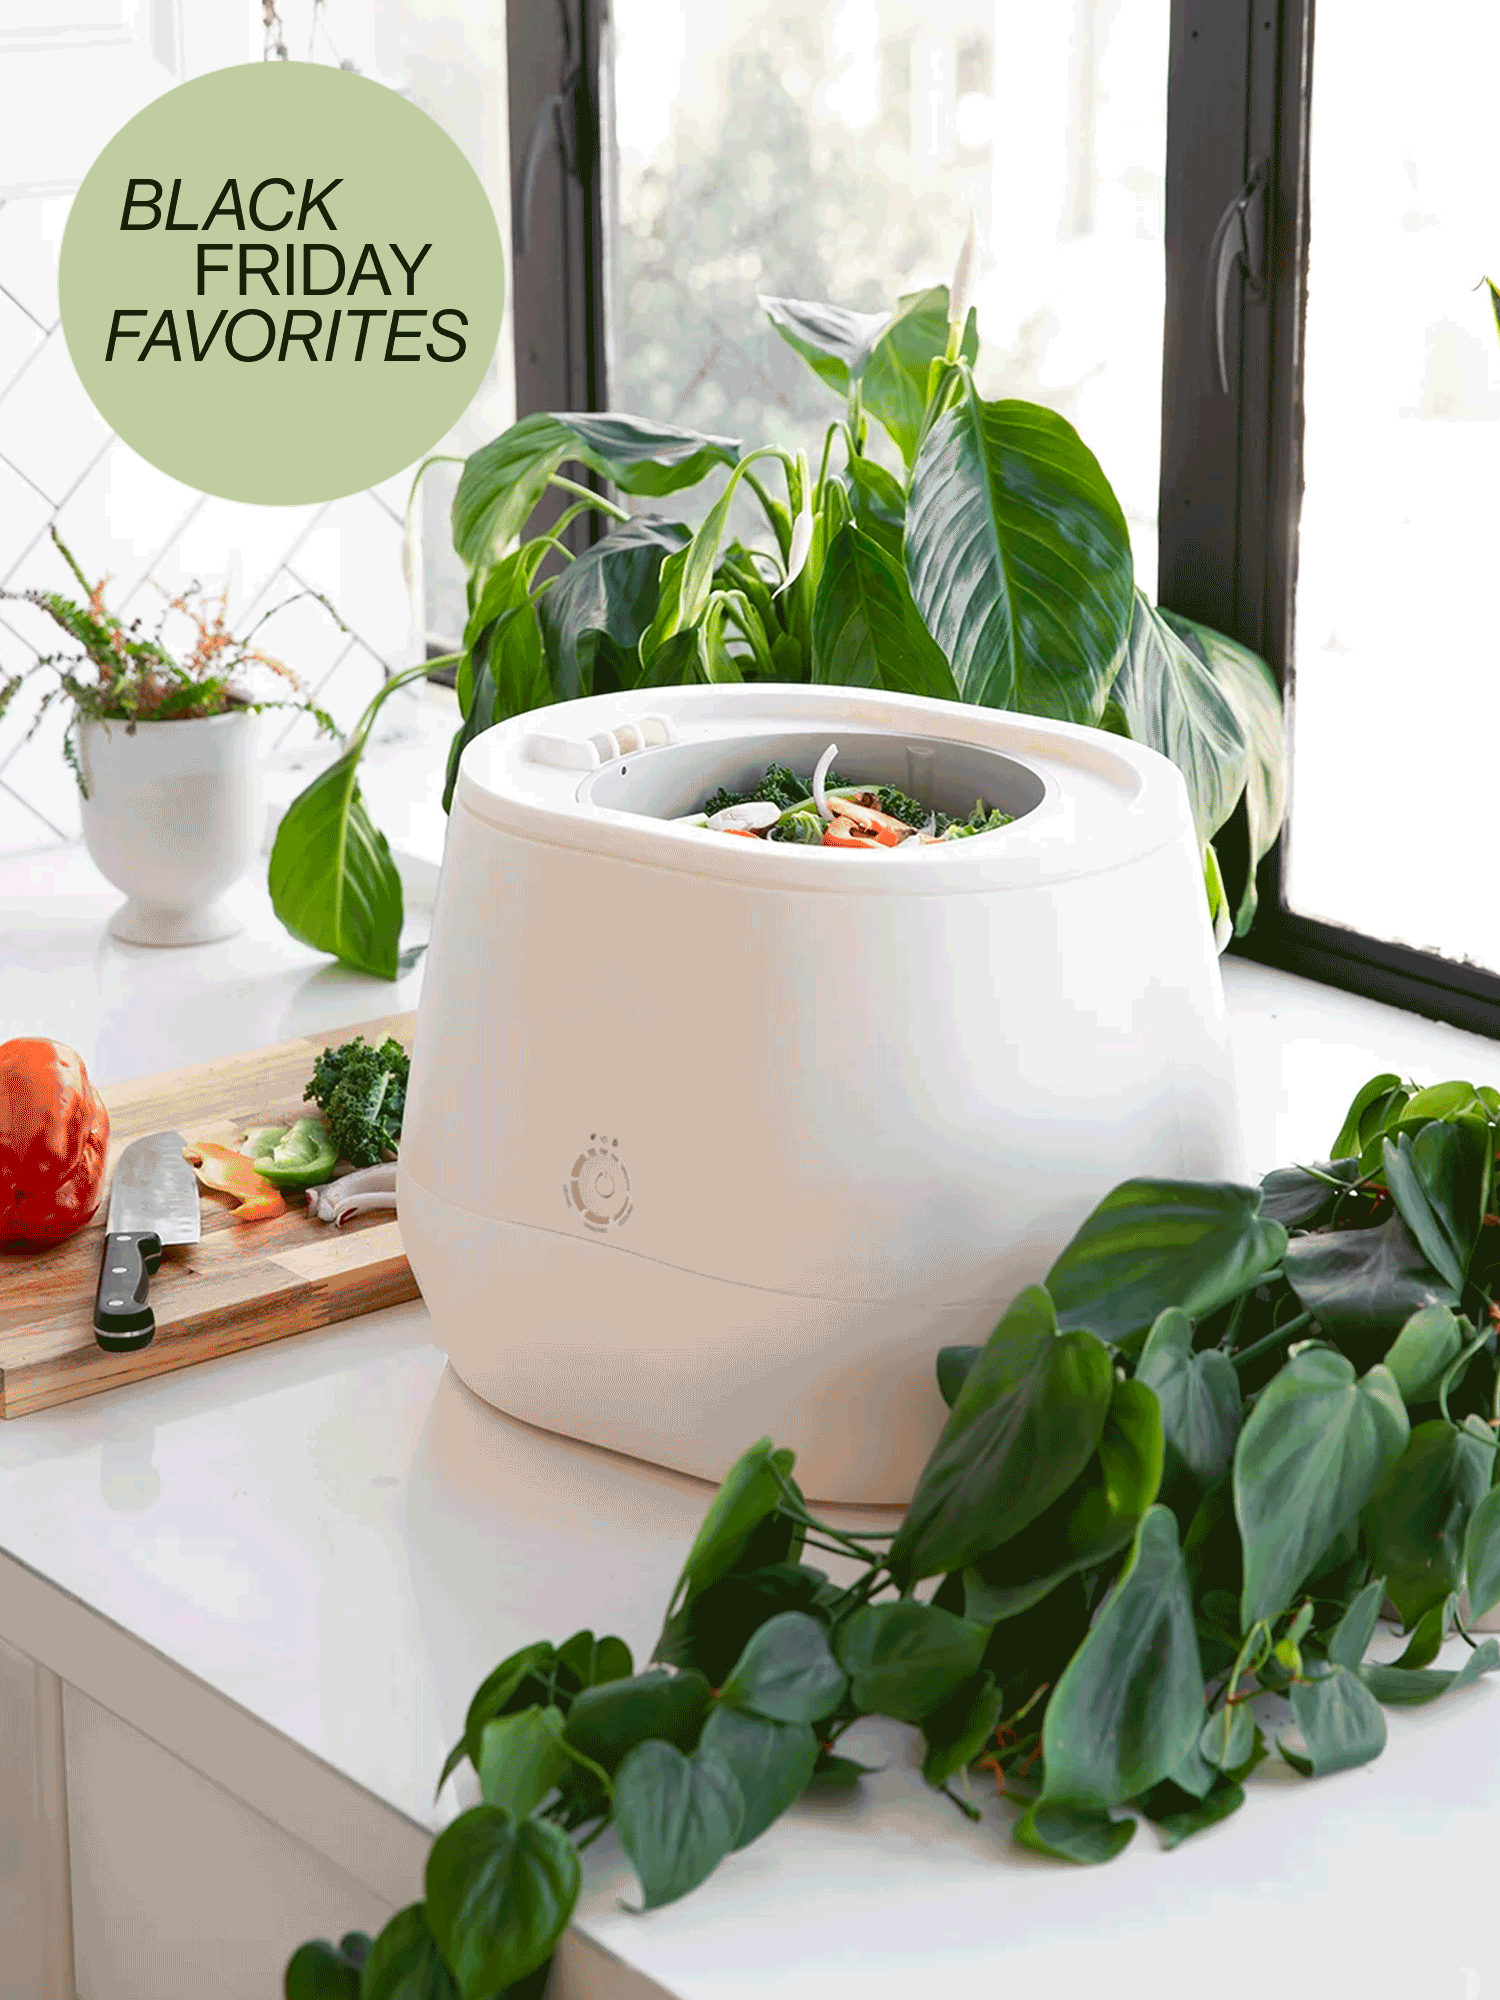 My Countertop Composter That Makes Ready-to-Use Soil Overnight Is $200 Off for Black Friday